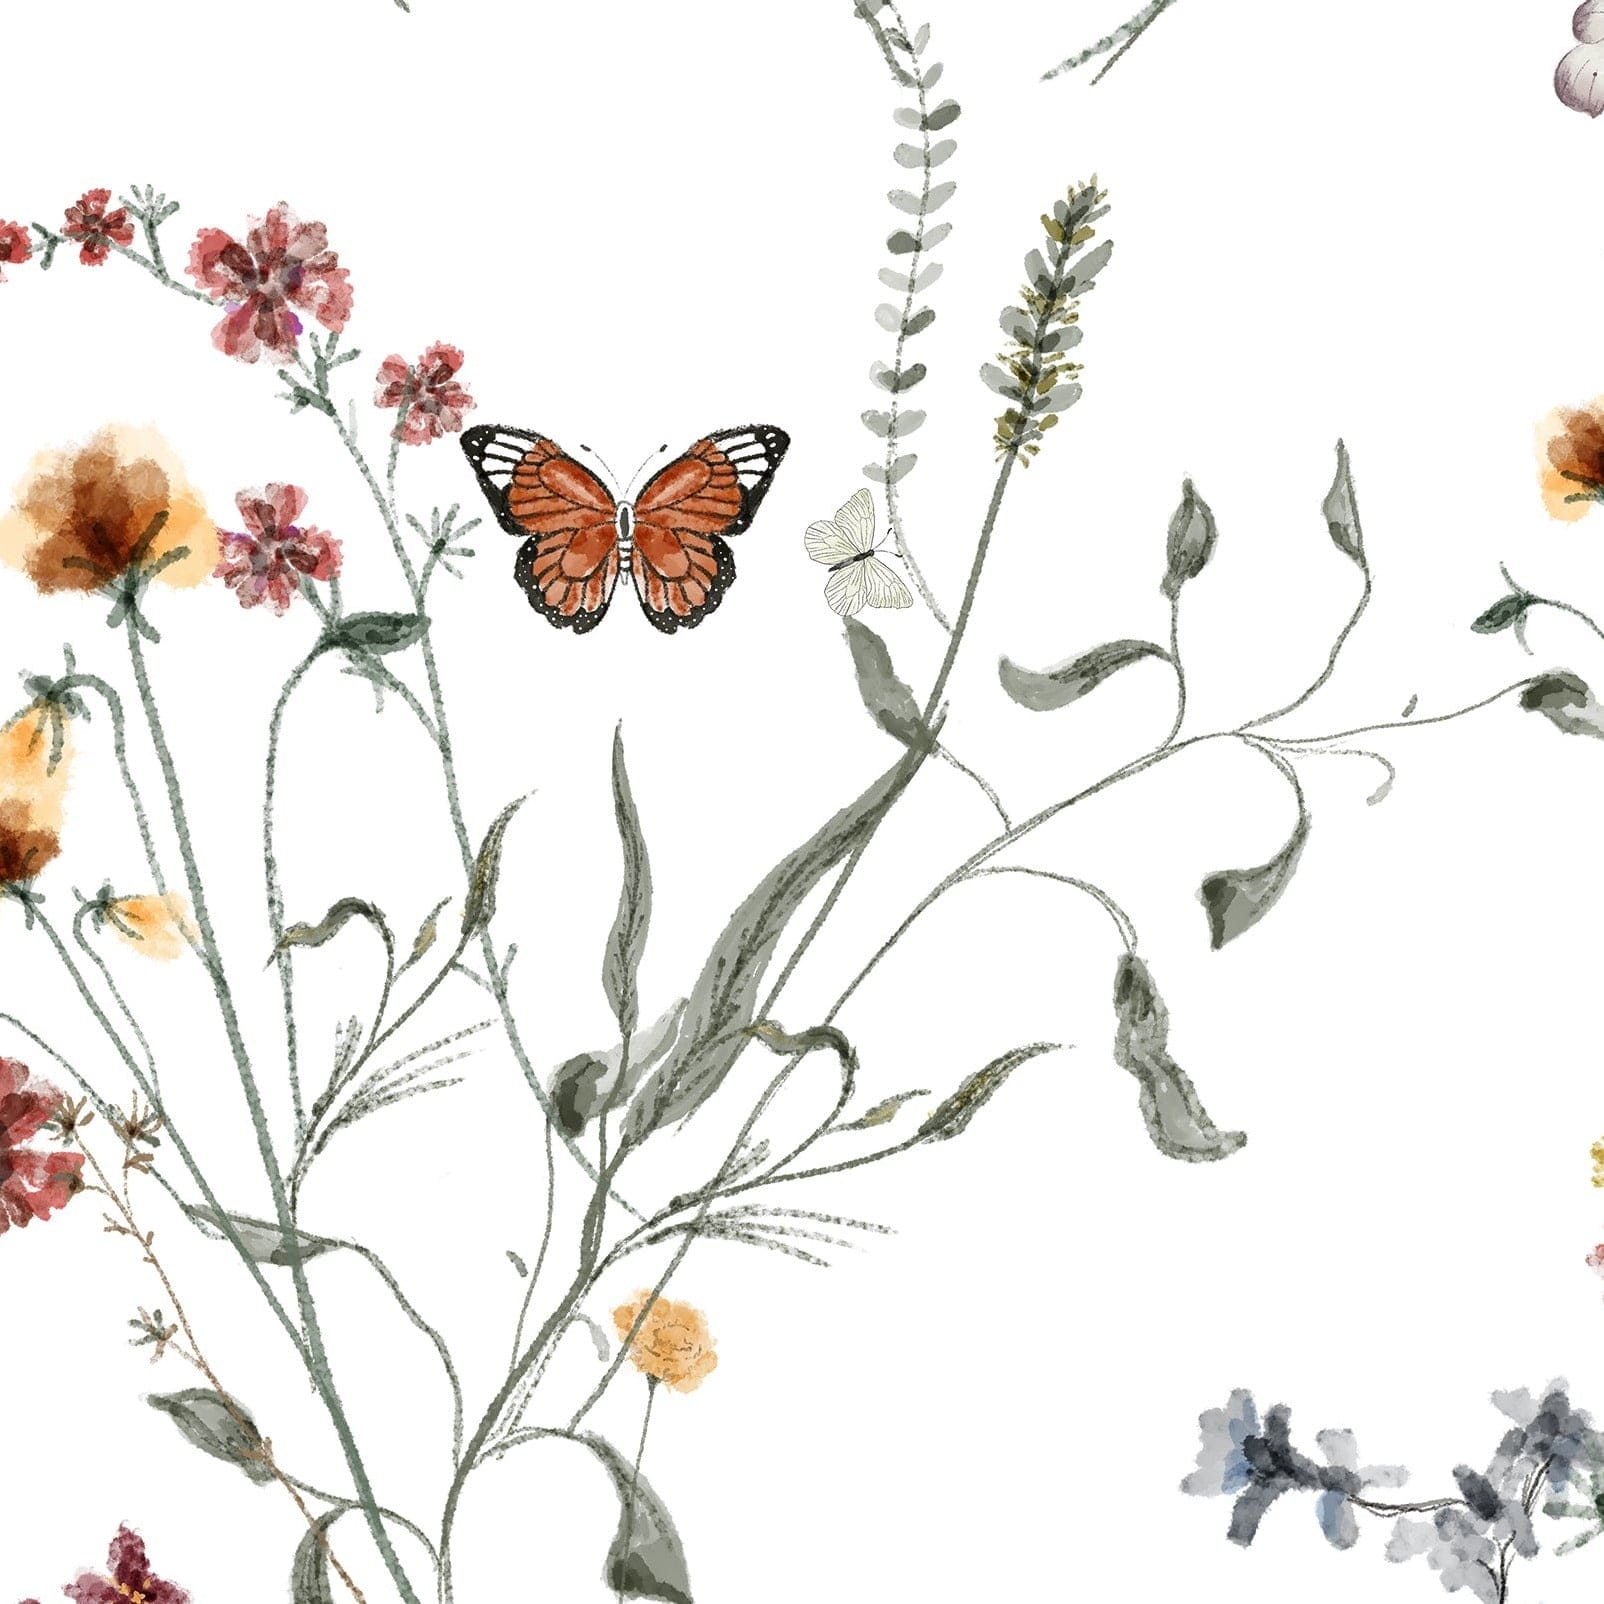 Close-up of Butterfly Botanicals wallpaper showing detailed botanical illustrations with butterflies and flowers in watercolor style on a light background.